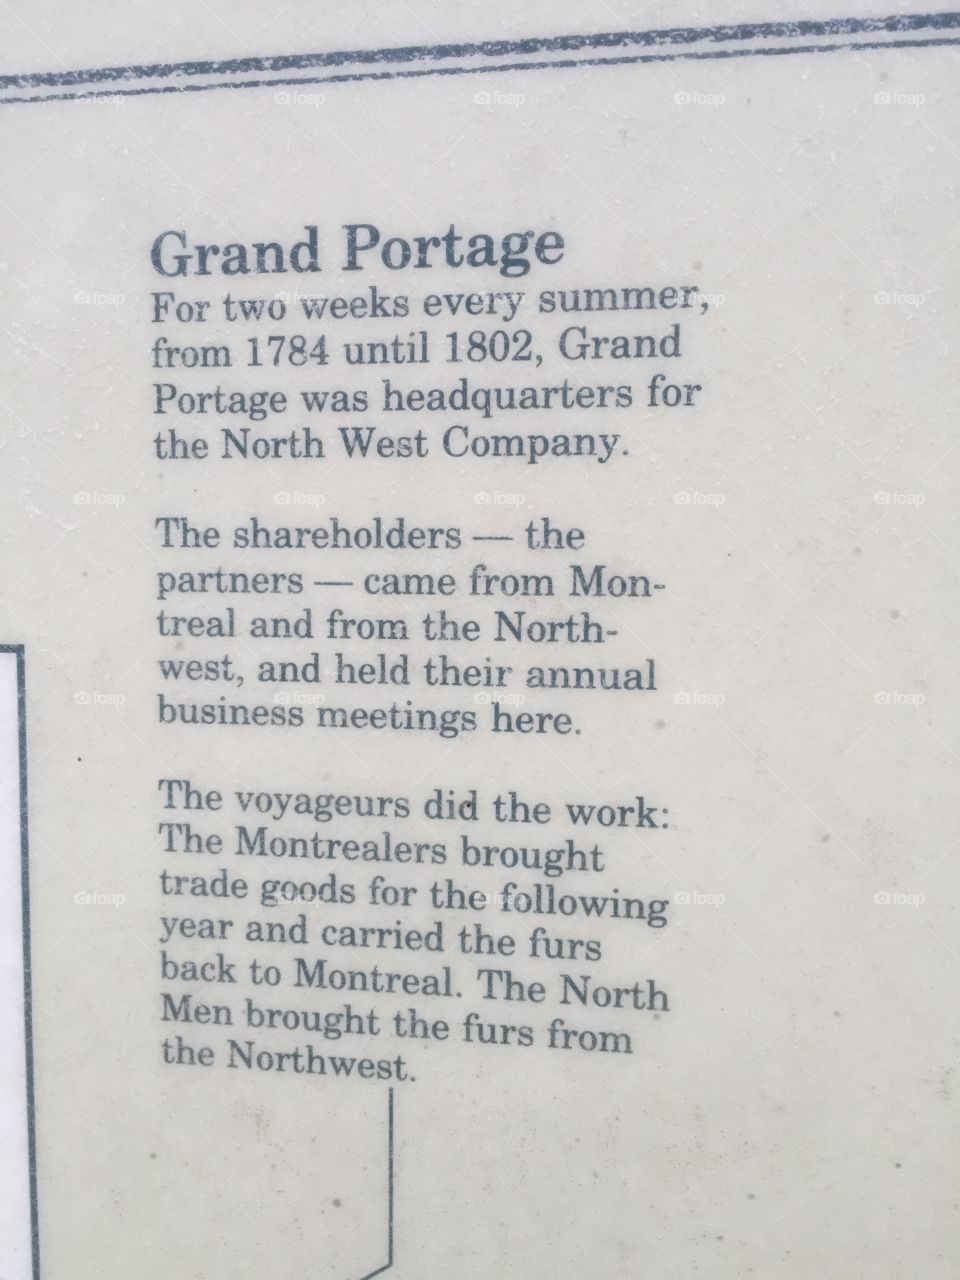 A sign explaining the history of Grand Portage.